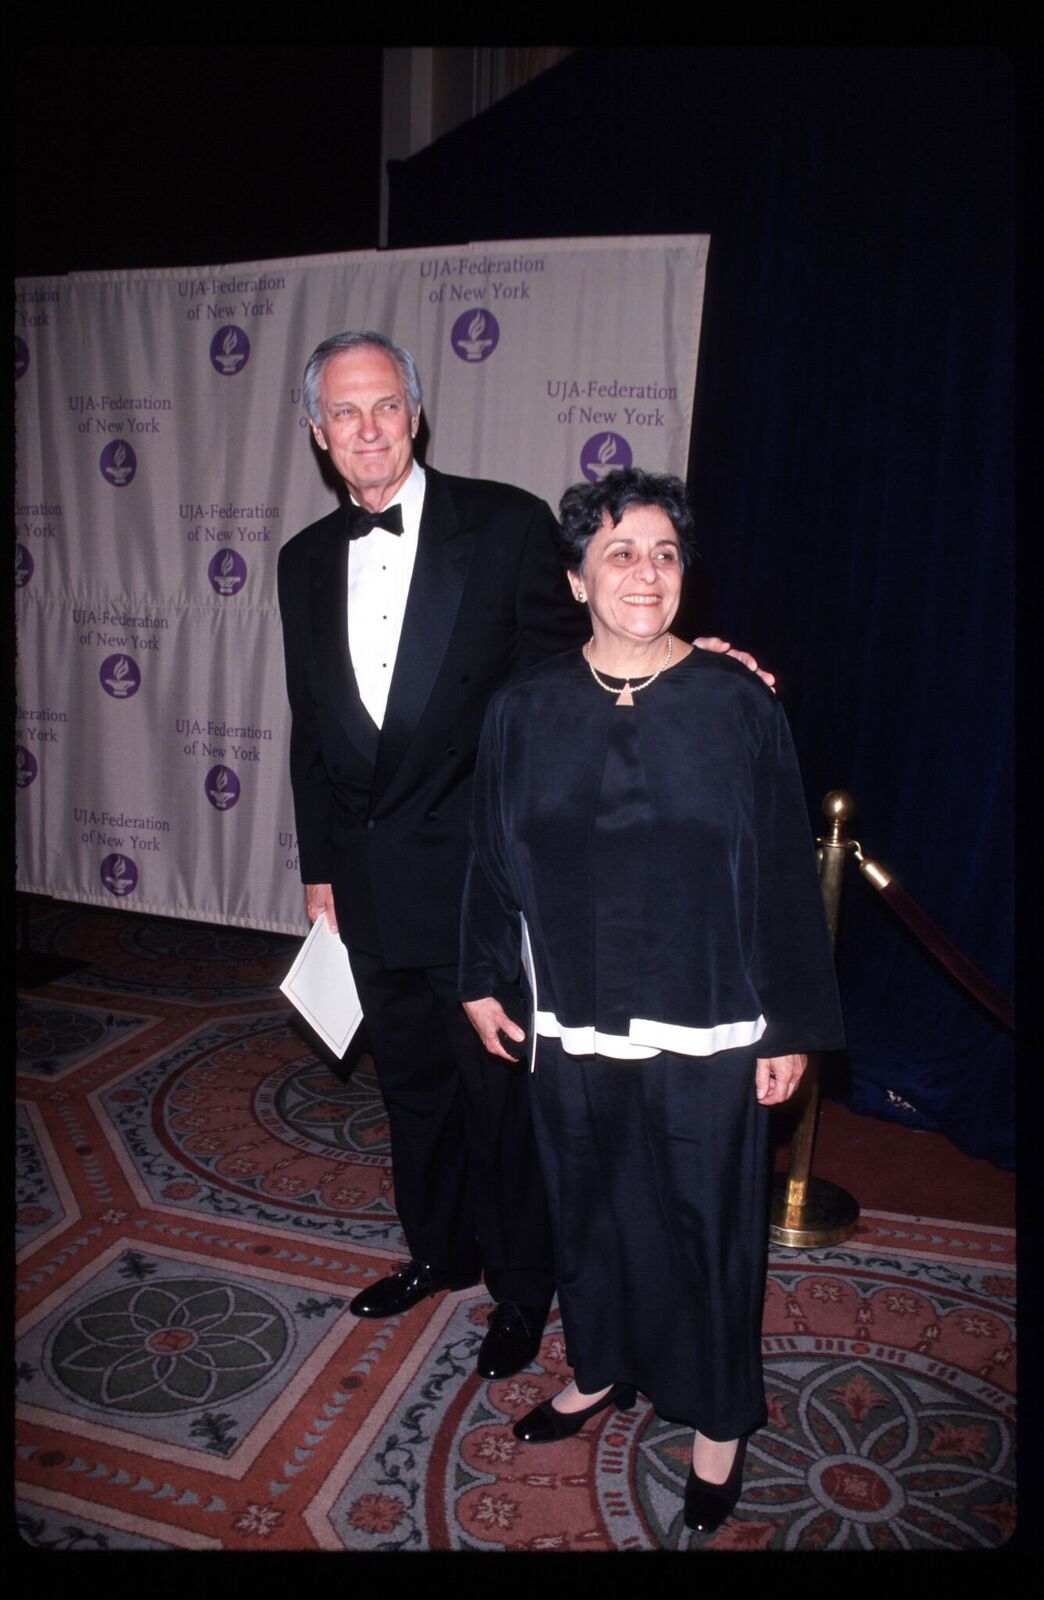 Alan Alda attends awards ceremony with his wife Arlene May 11, 1999 in New York City. | Source: Getty Images